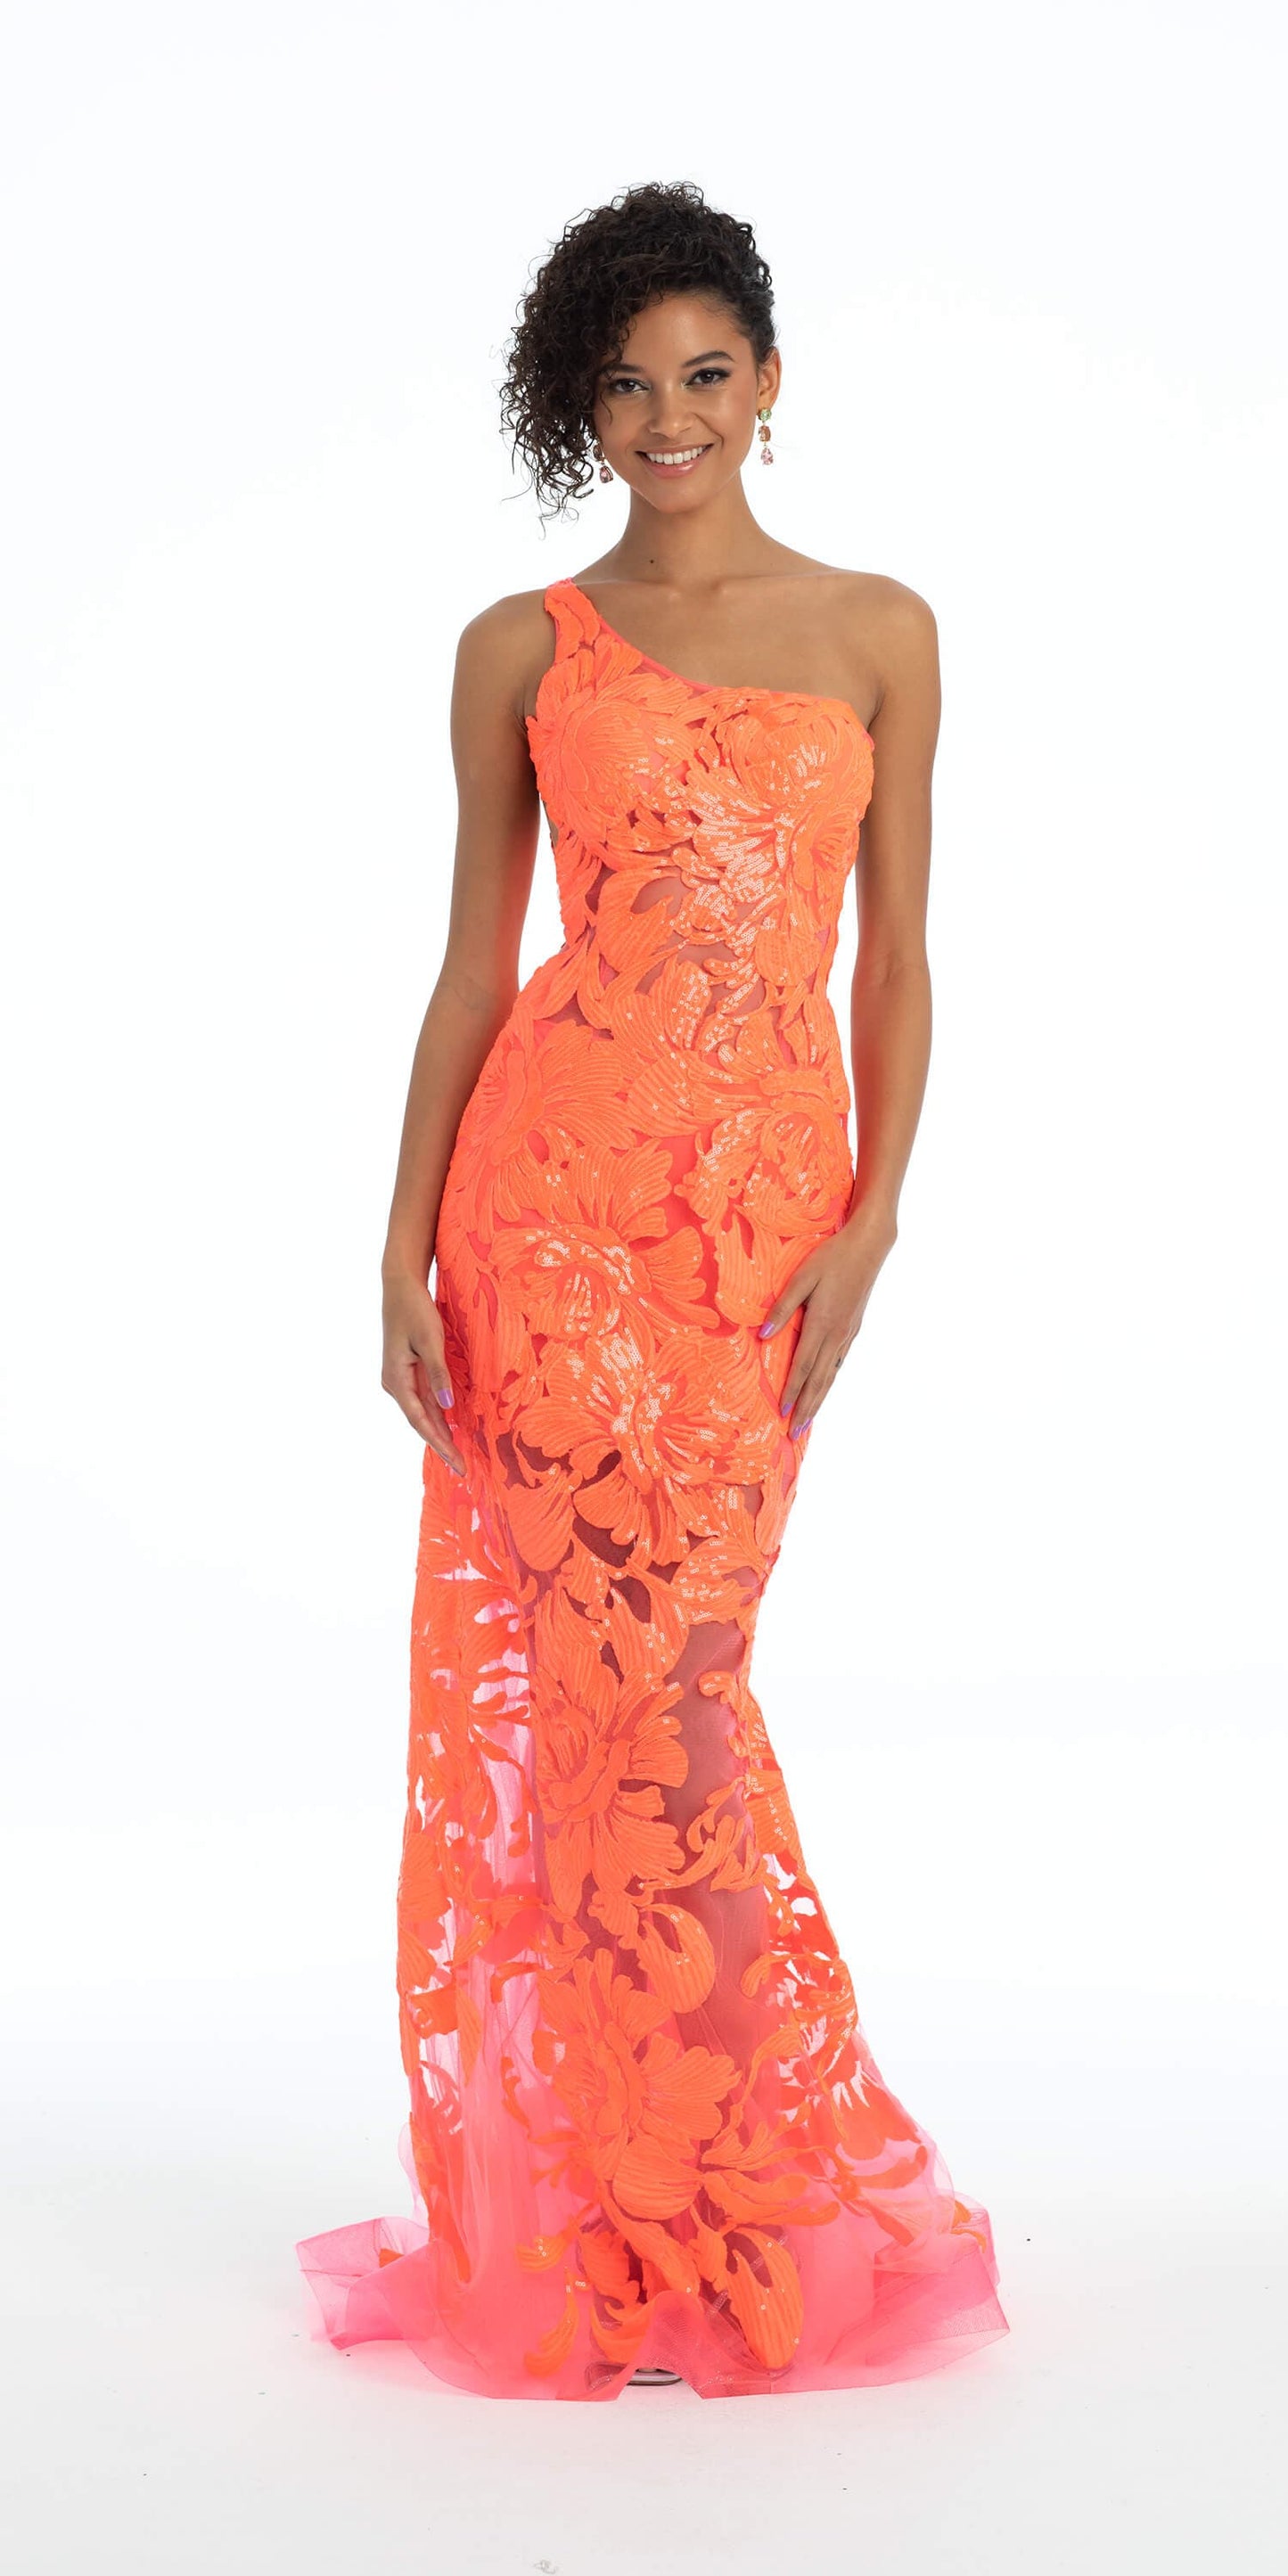 Camille La Vie Sequin Floral One Shoulder Illusion Mermaid Dress with Train missy / 00 / neon-coral